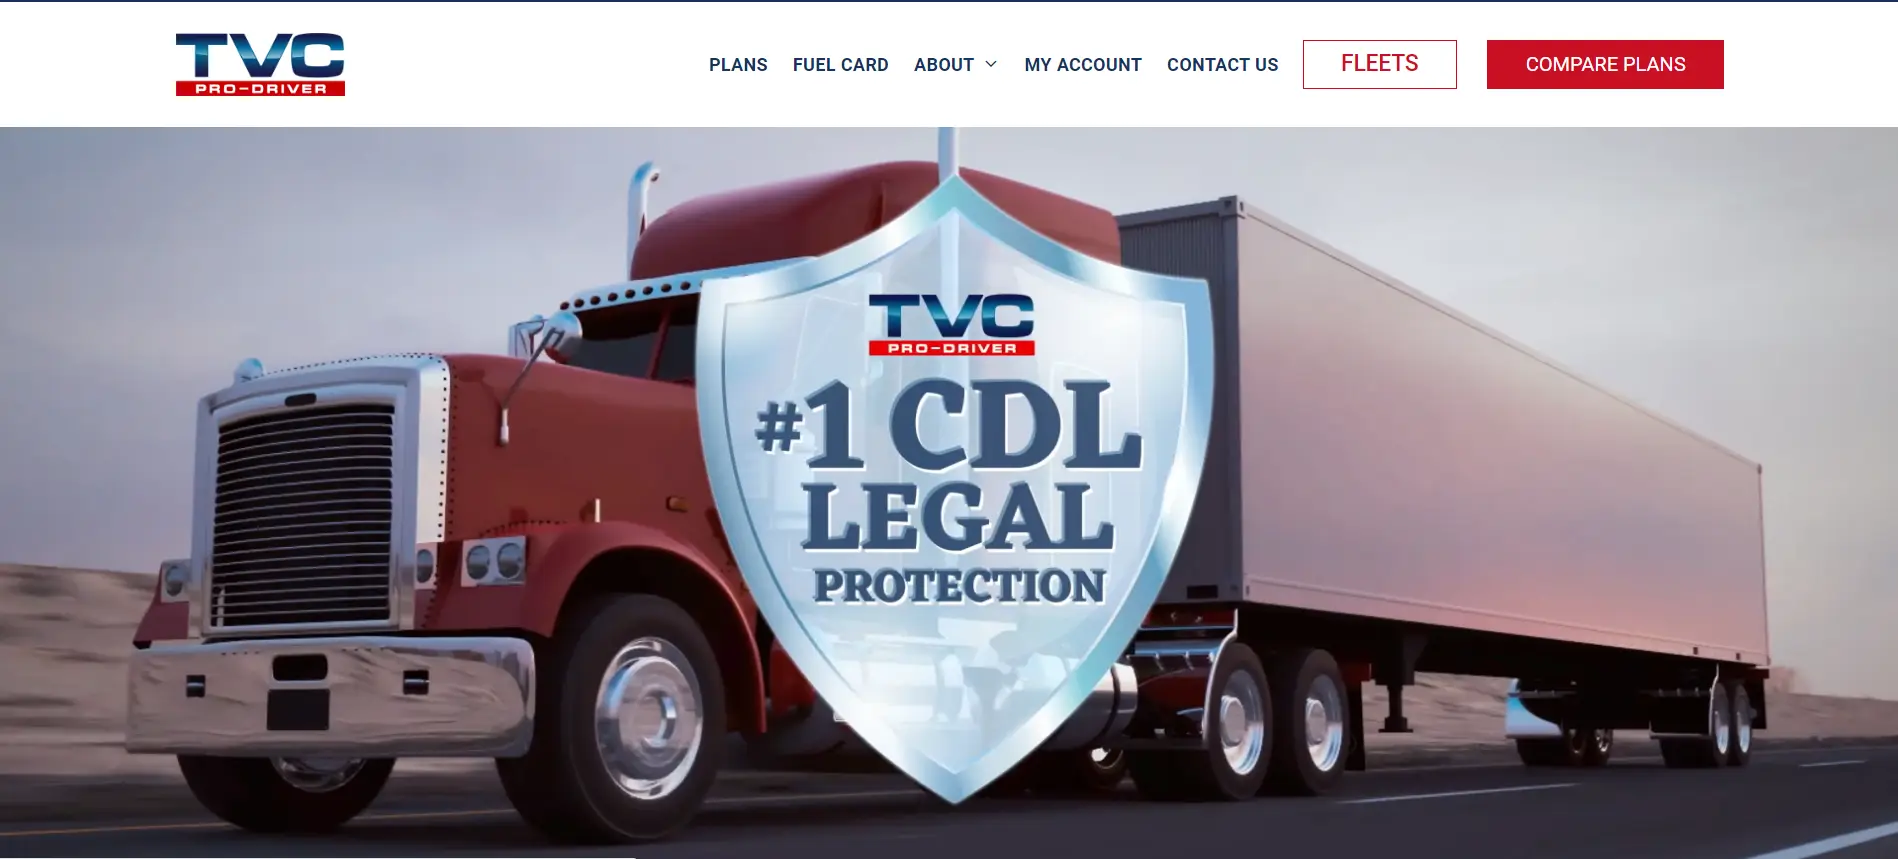 How To Cancel TVC Membership? Cancel TVC Pro-Driver!!